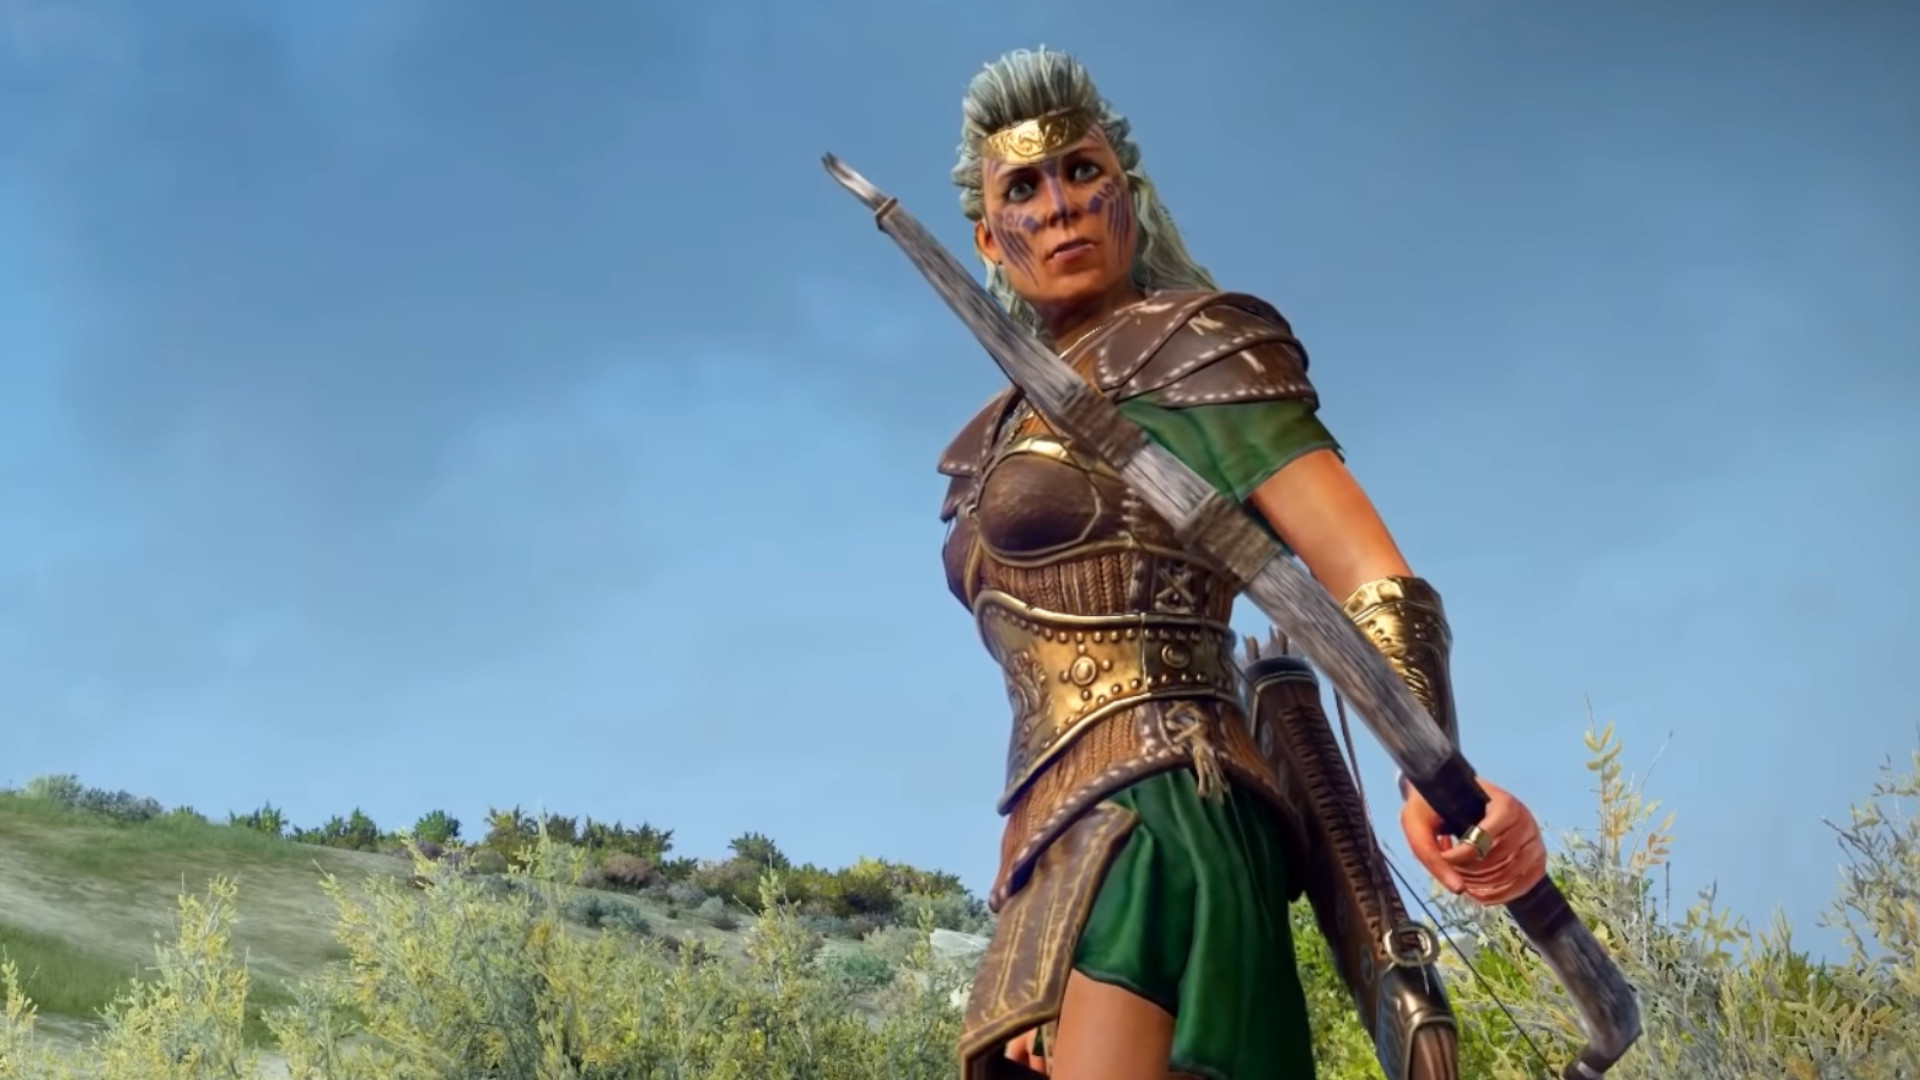 Here’s our first look at Total War Saga: Troy’s Amazons faction